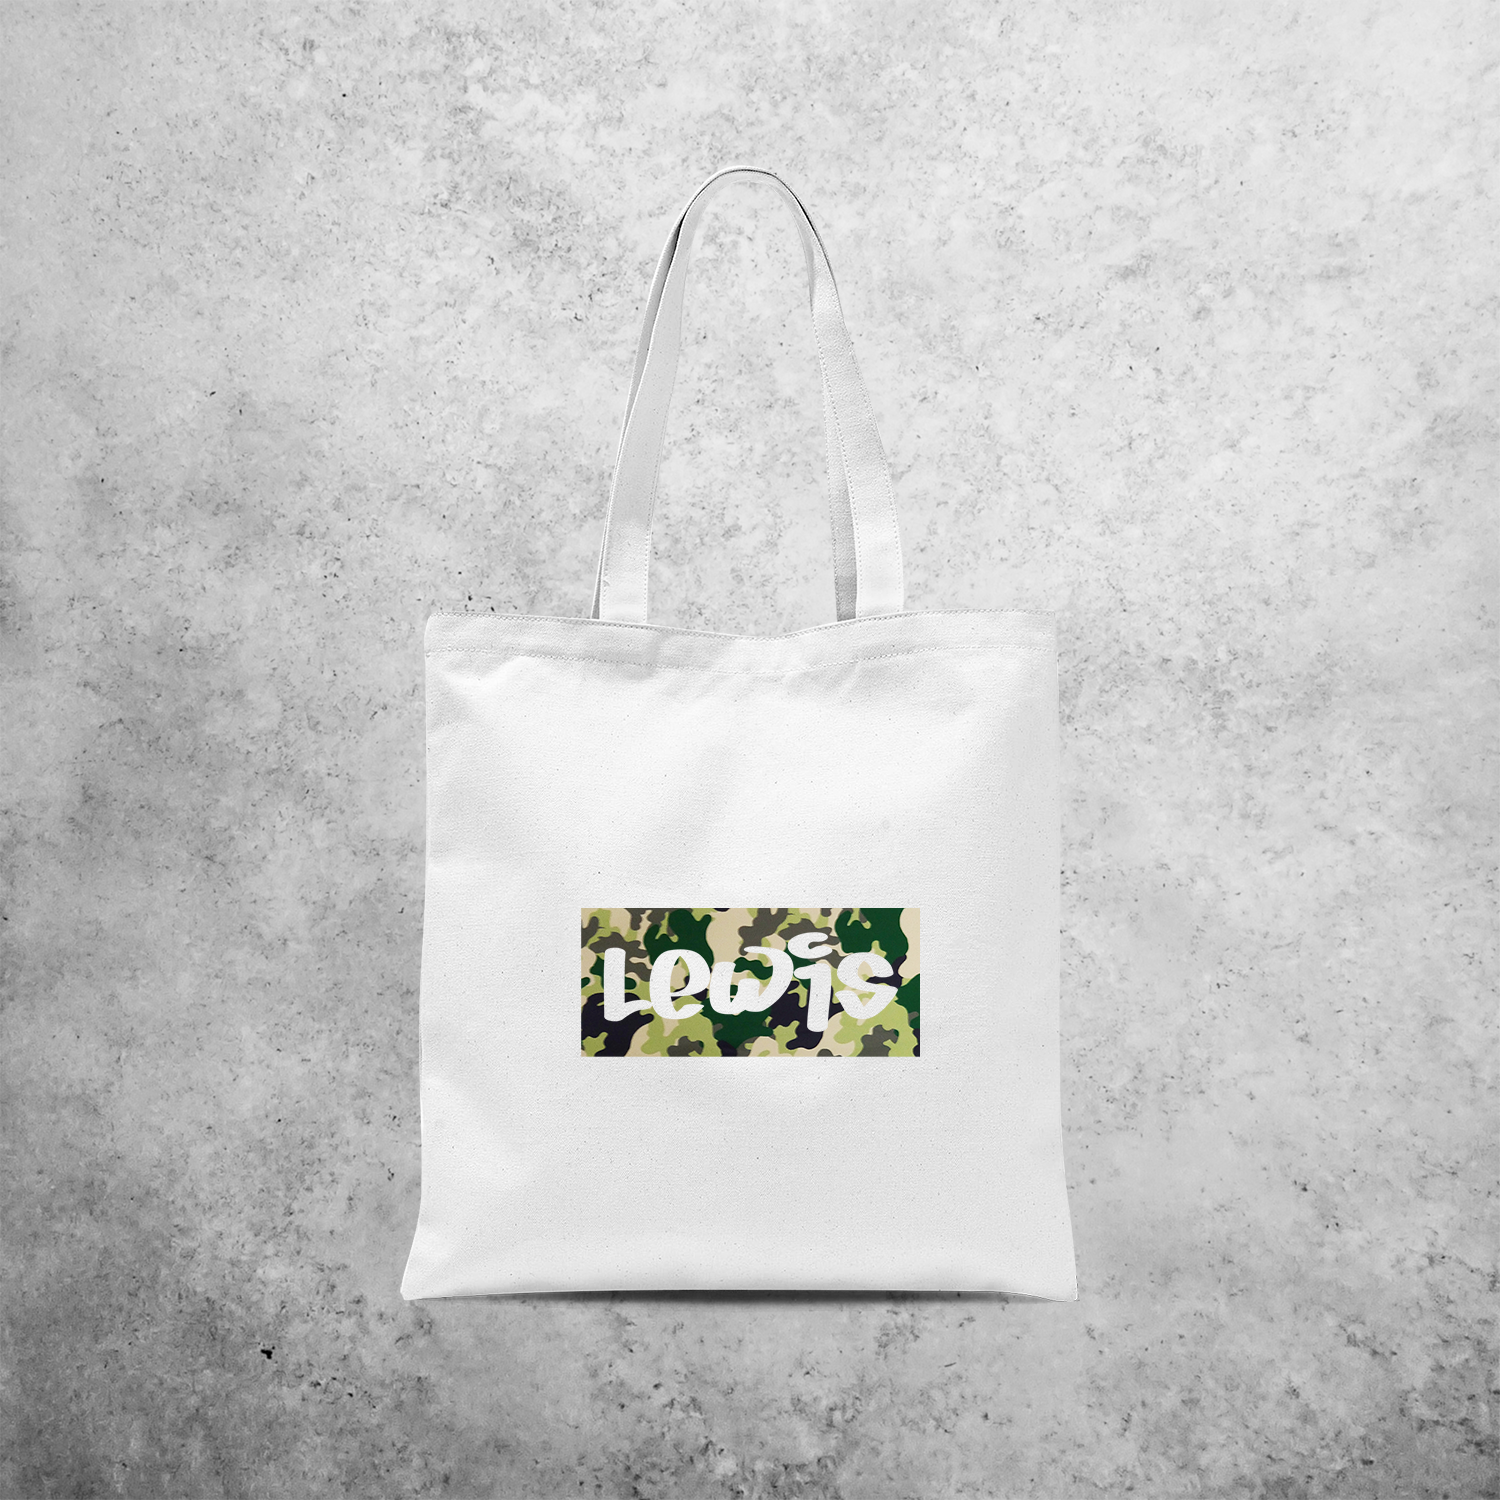 Camouflage name tote bag